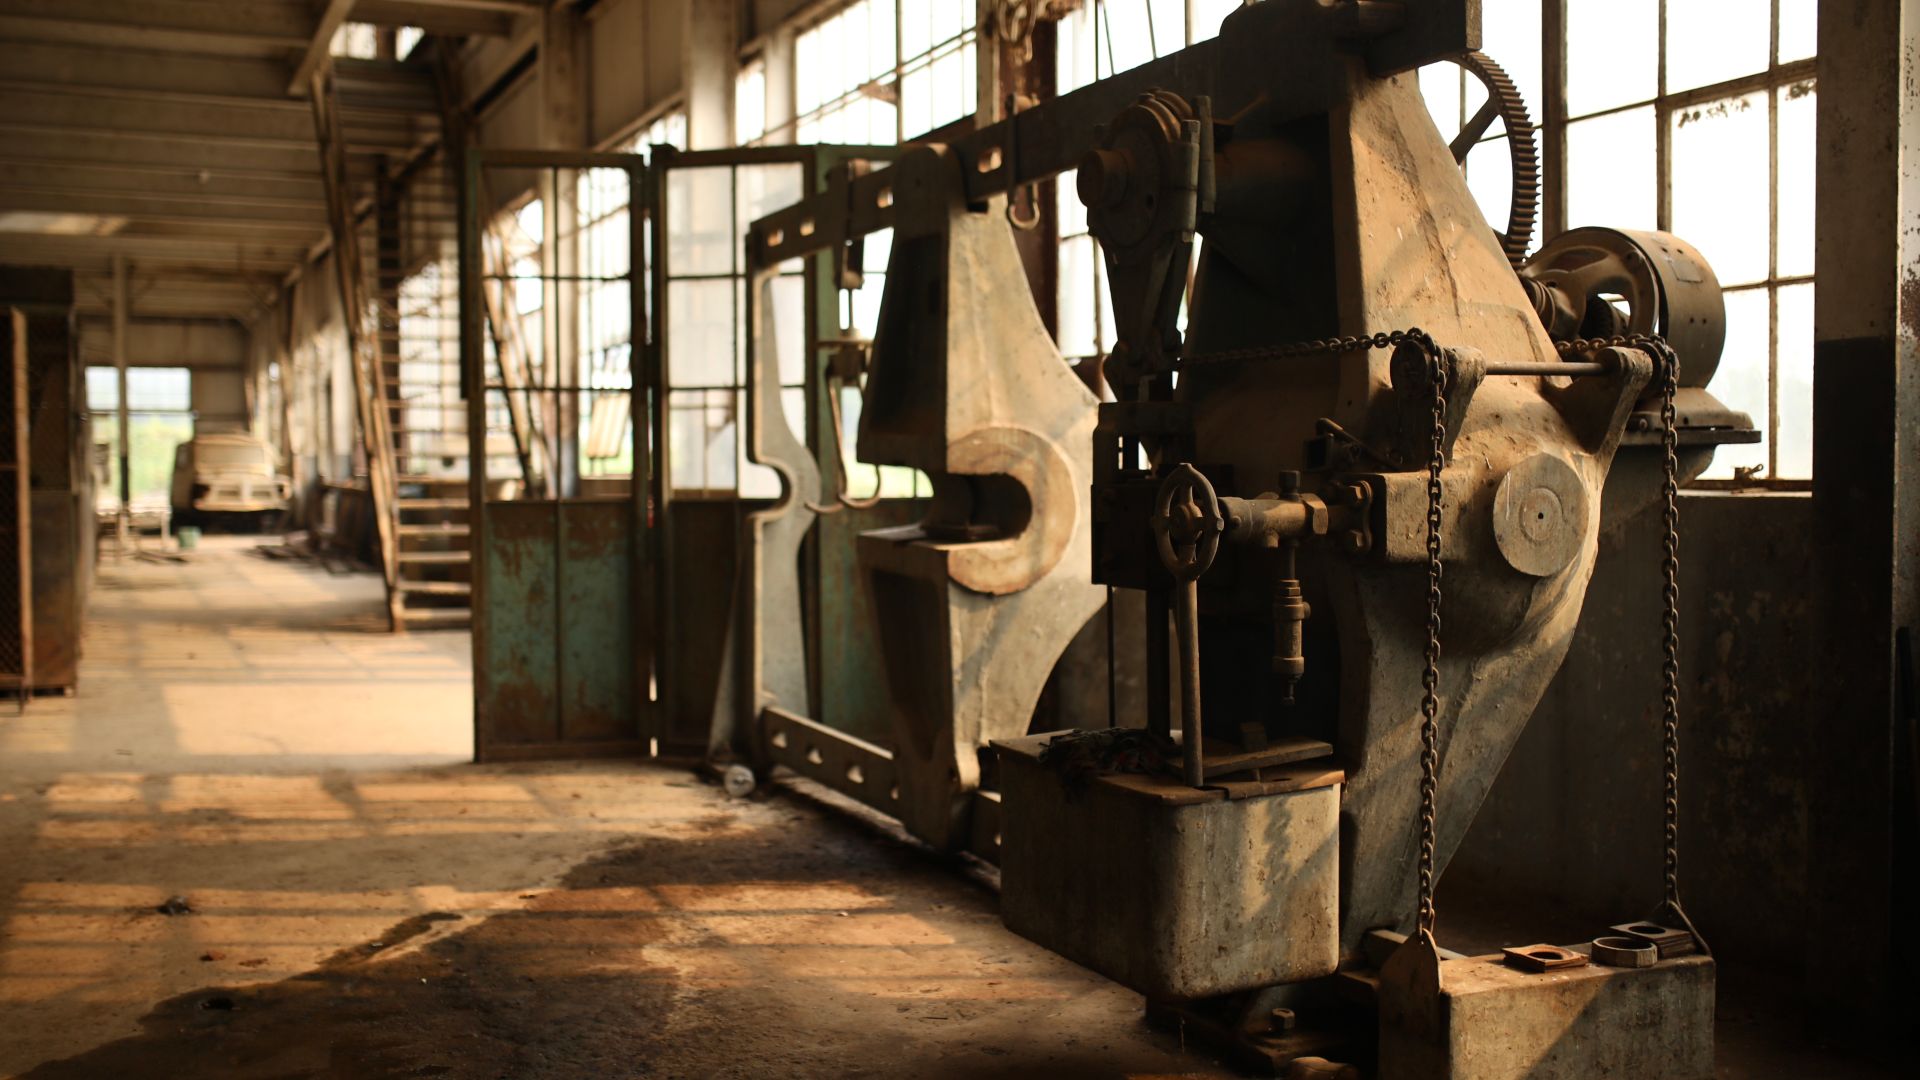 Heavy machinery sits rusted on an old factory floor.